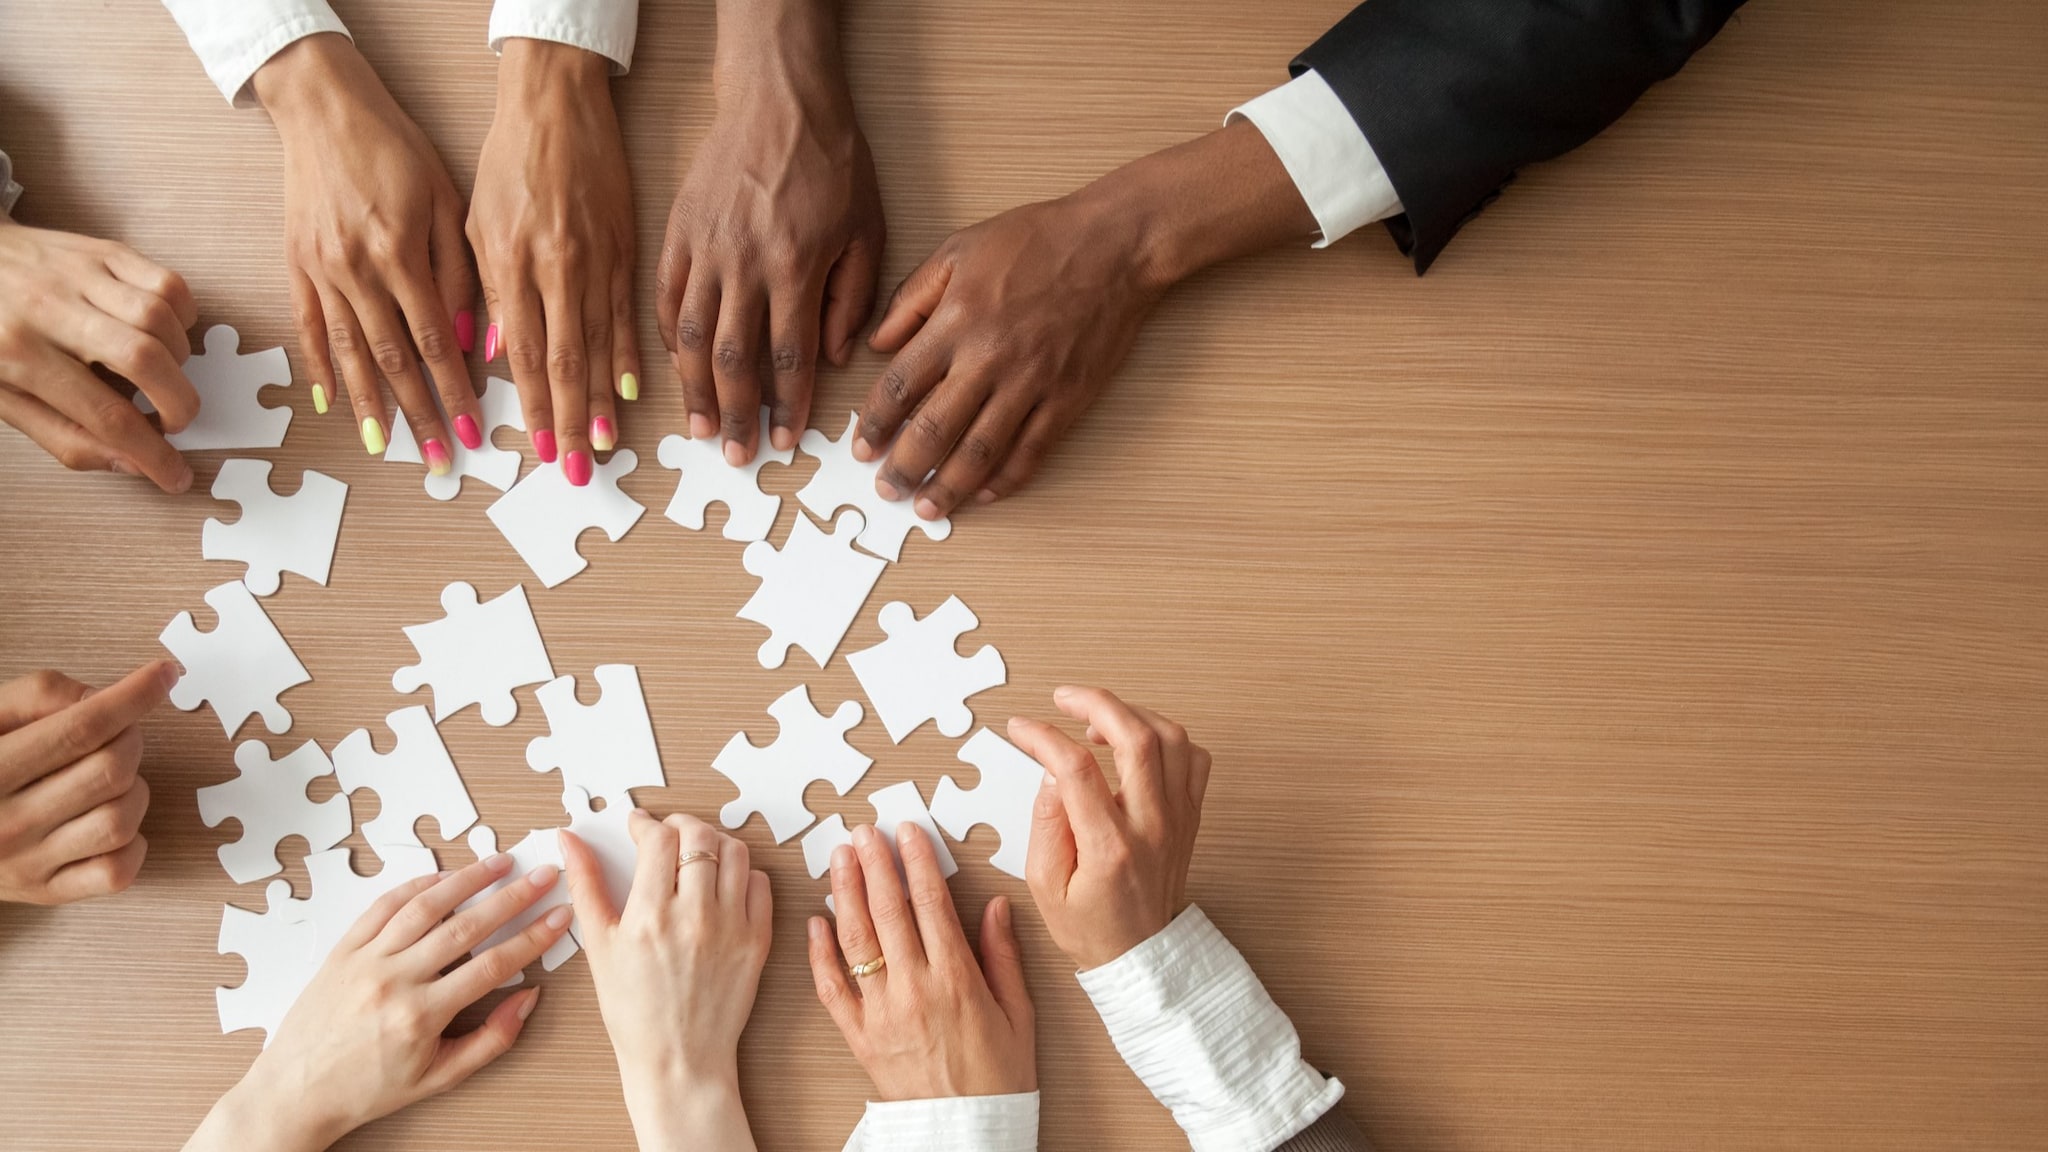 Overhead shot of different people's hands holding white puzzle pieces.